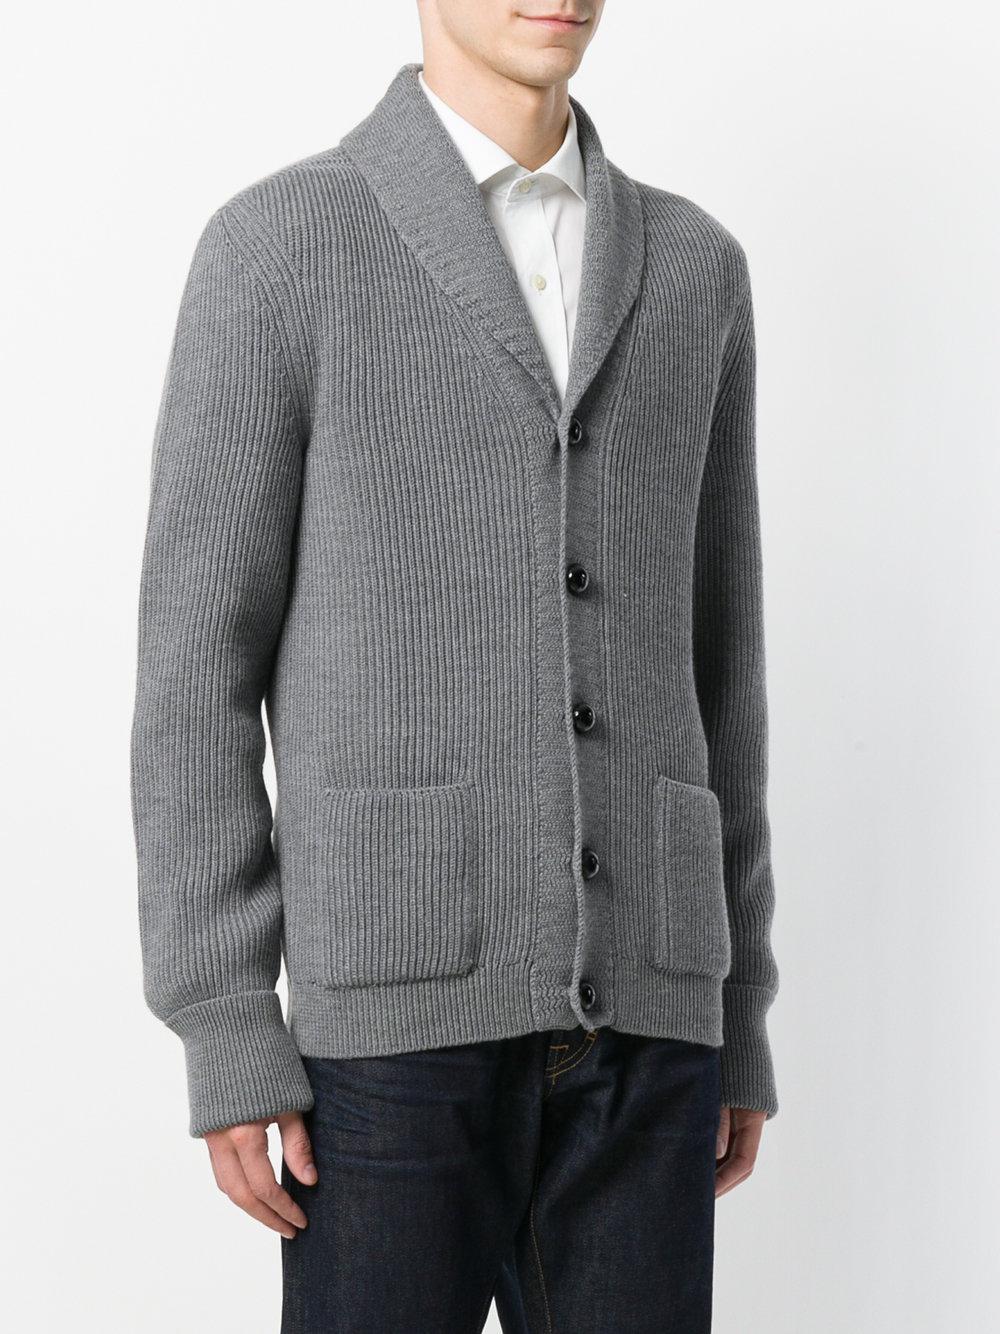 Tom Ford Steve Mcqueen Shawl-collar Ribbed Wool Cardigan in Gray for Men -  Lyst